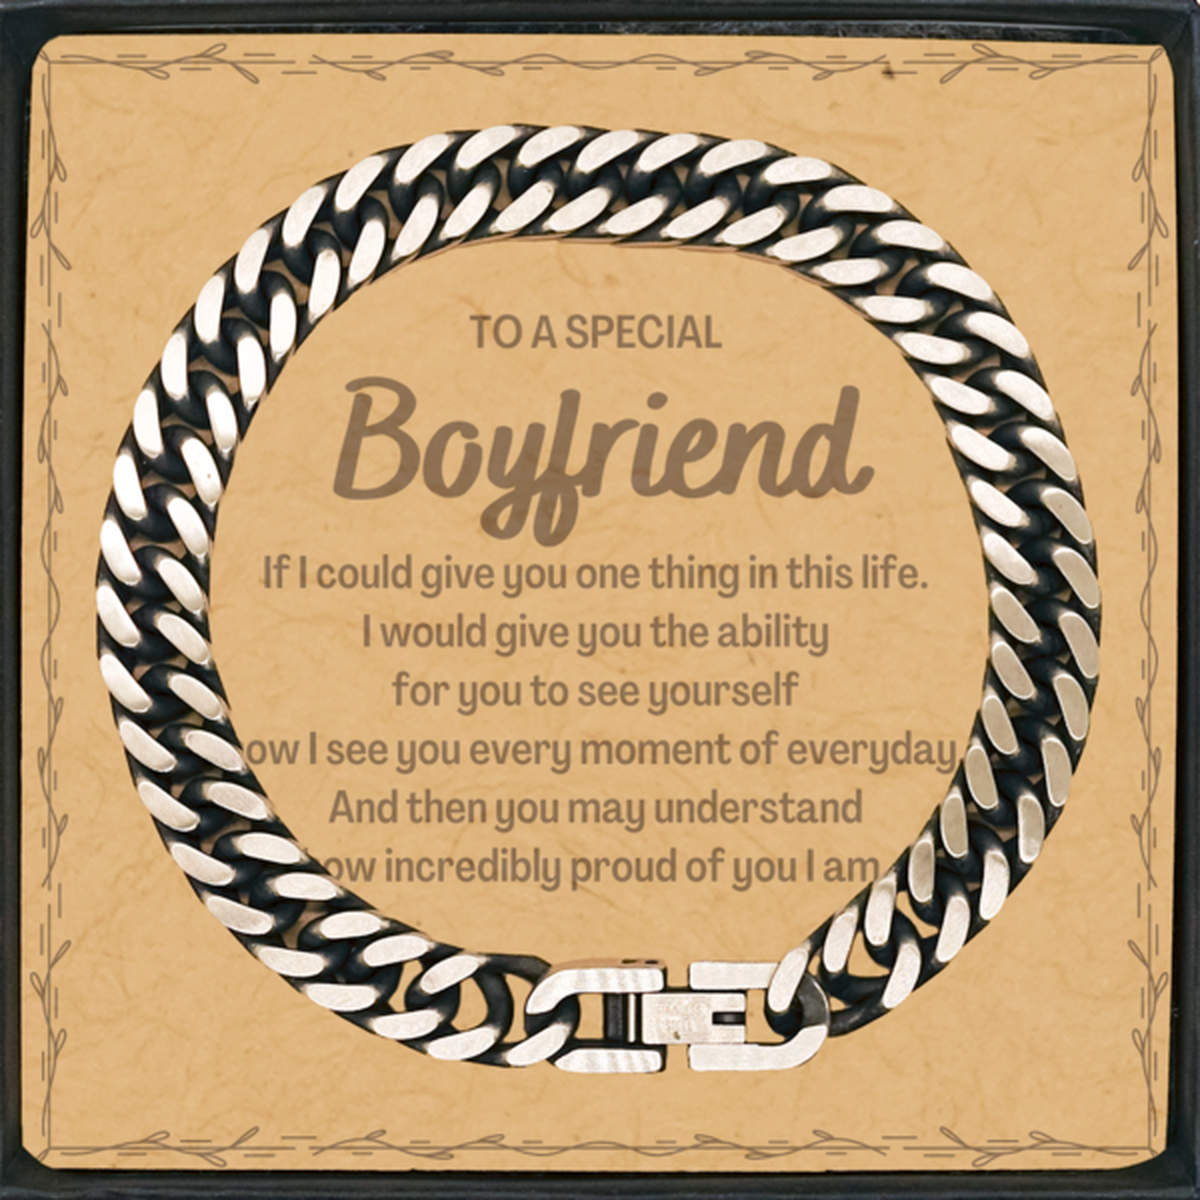 To My Boyfriend Cuban Link Chain Bracelet, Gifts For Boyfriend Message Card, Inspirational Gifts for Christmas Birthday, Epic Gifts for Boyfriend To A Special Boyfriend how incredibly proud of you I am